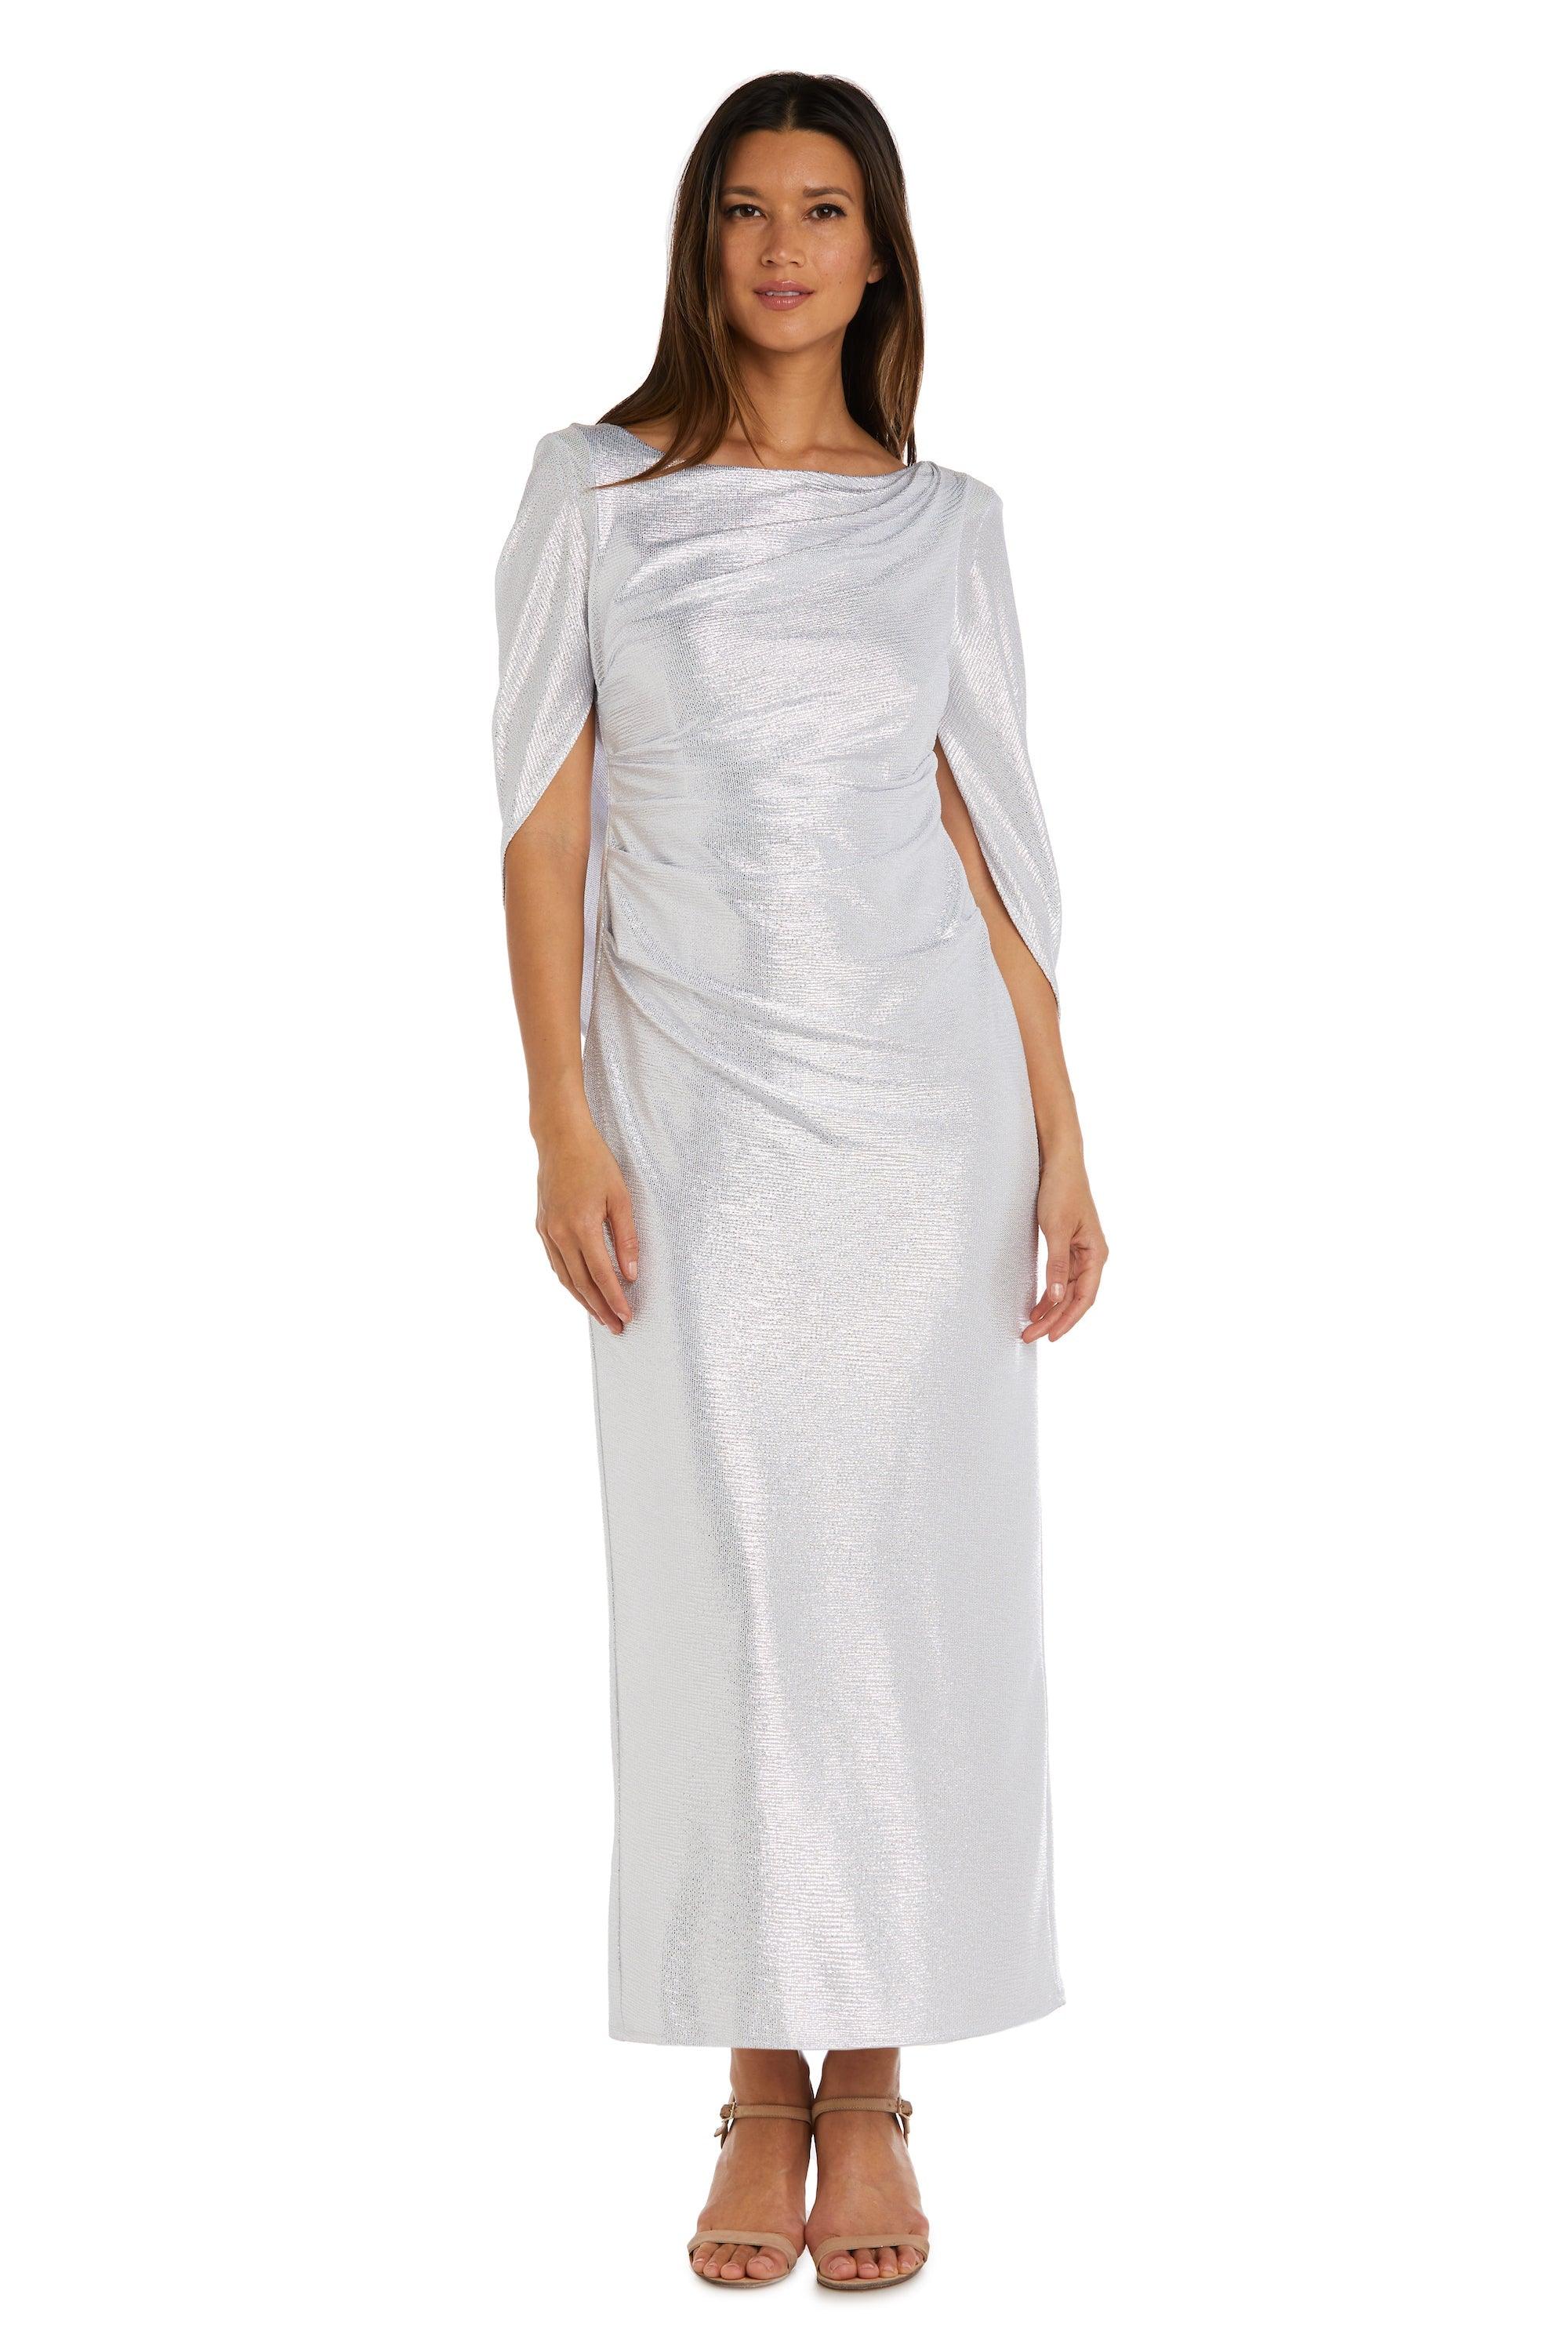 R&M Richards Long Mother of the Bride Dress 7472 - The Dress Outlet